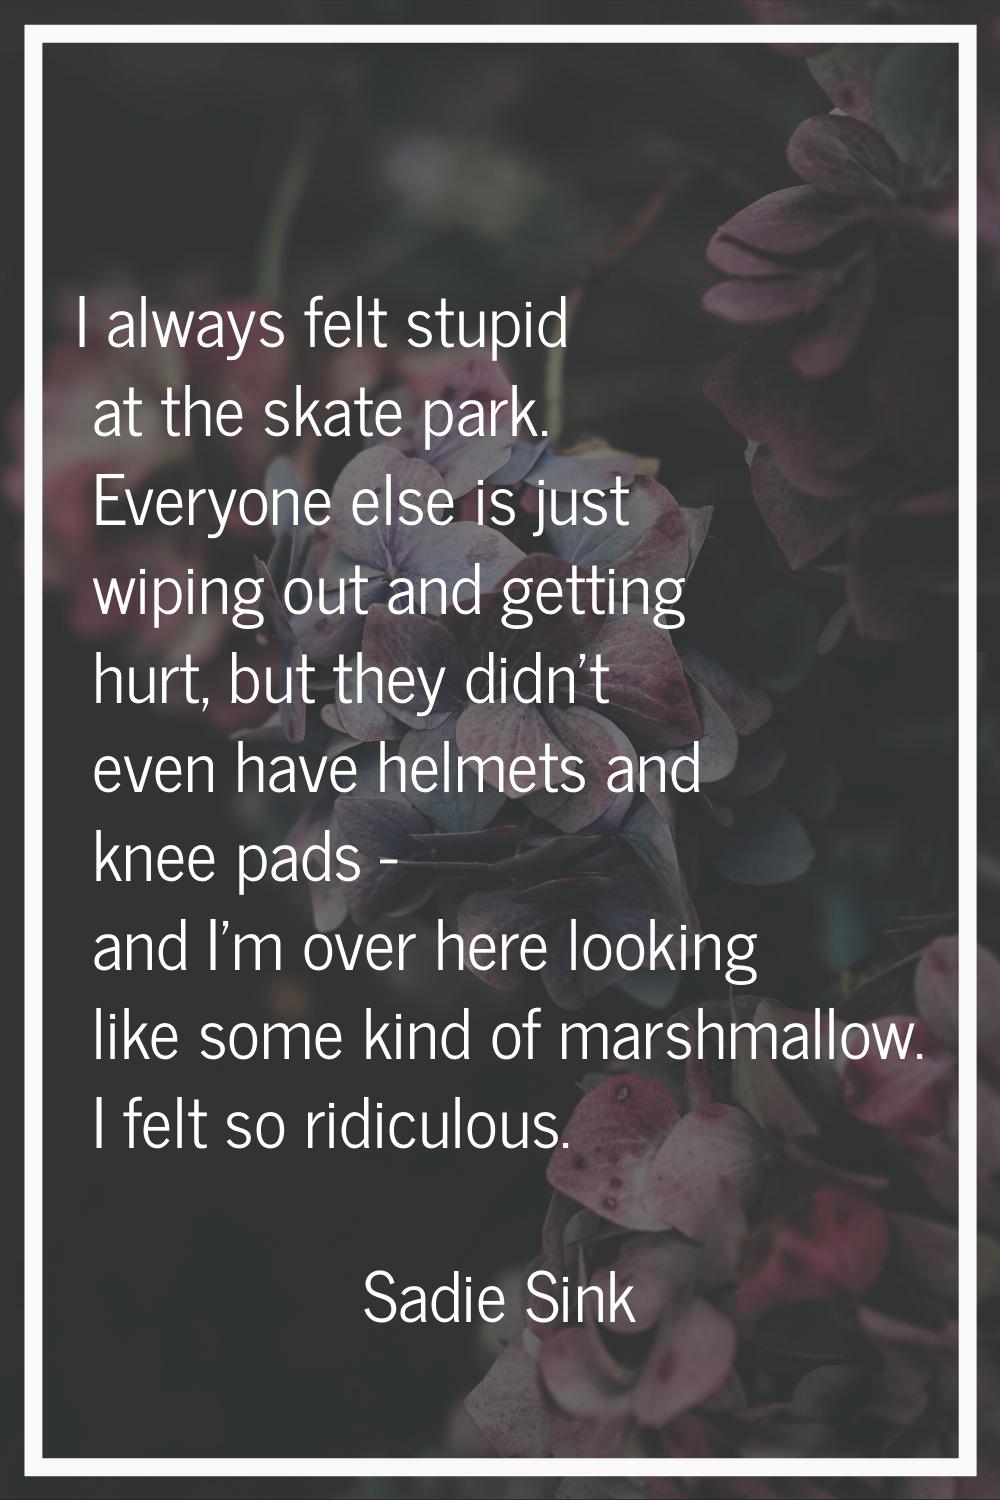 I always felt stupid at the skate park. Everyone else is just wiping out and getting hurt, but they